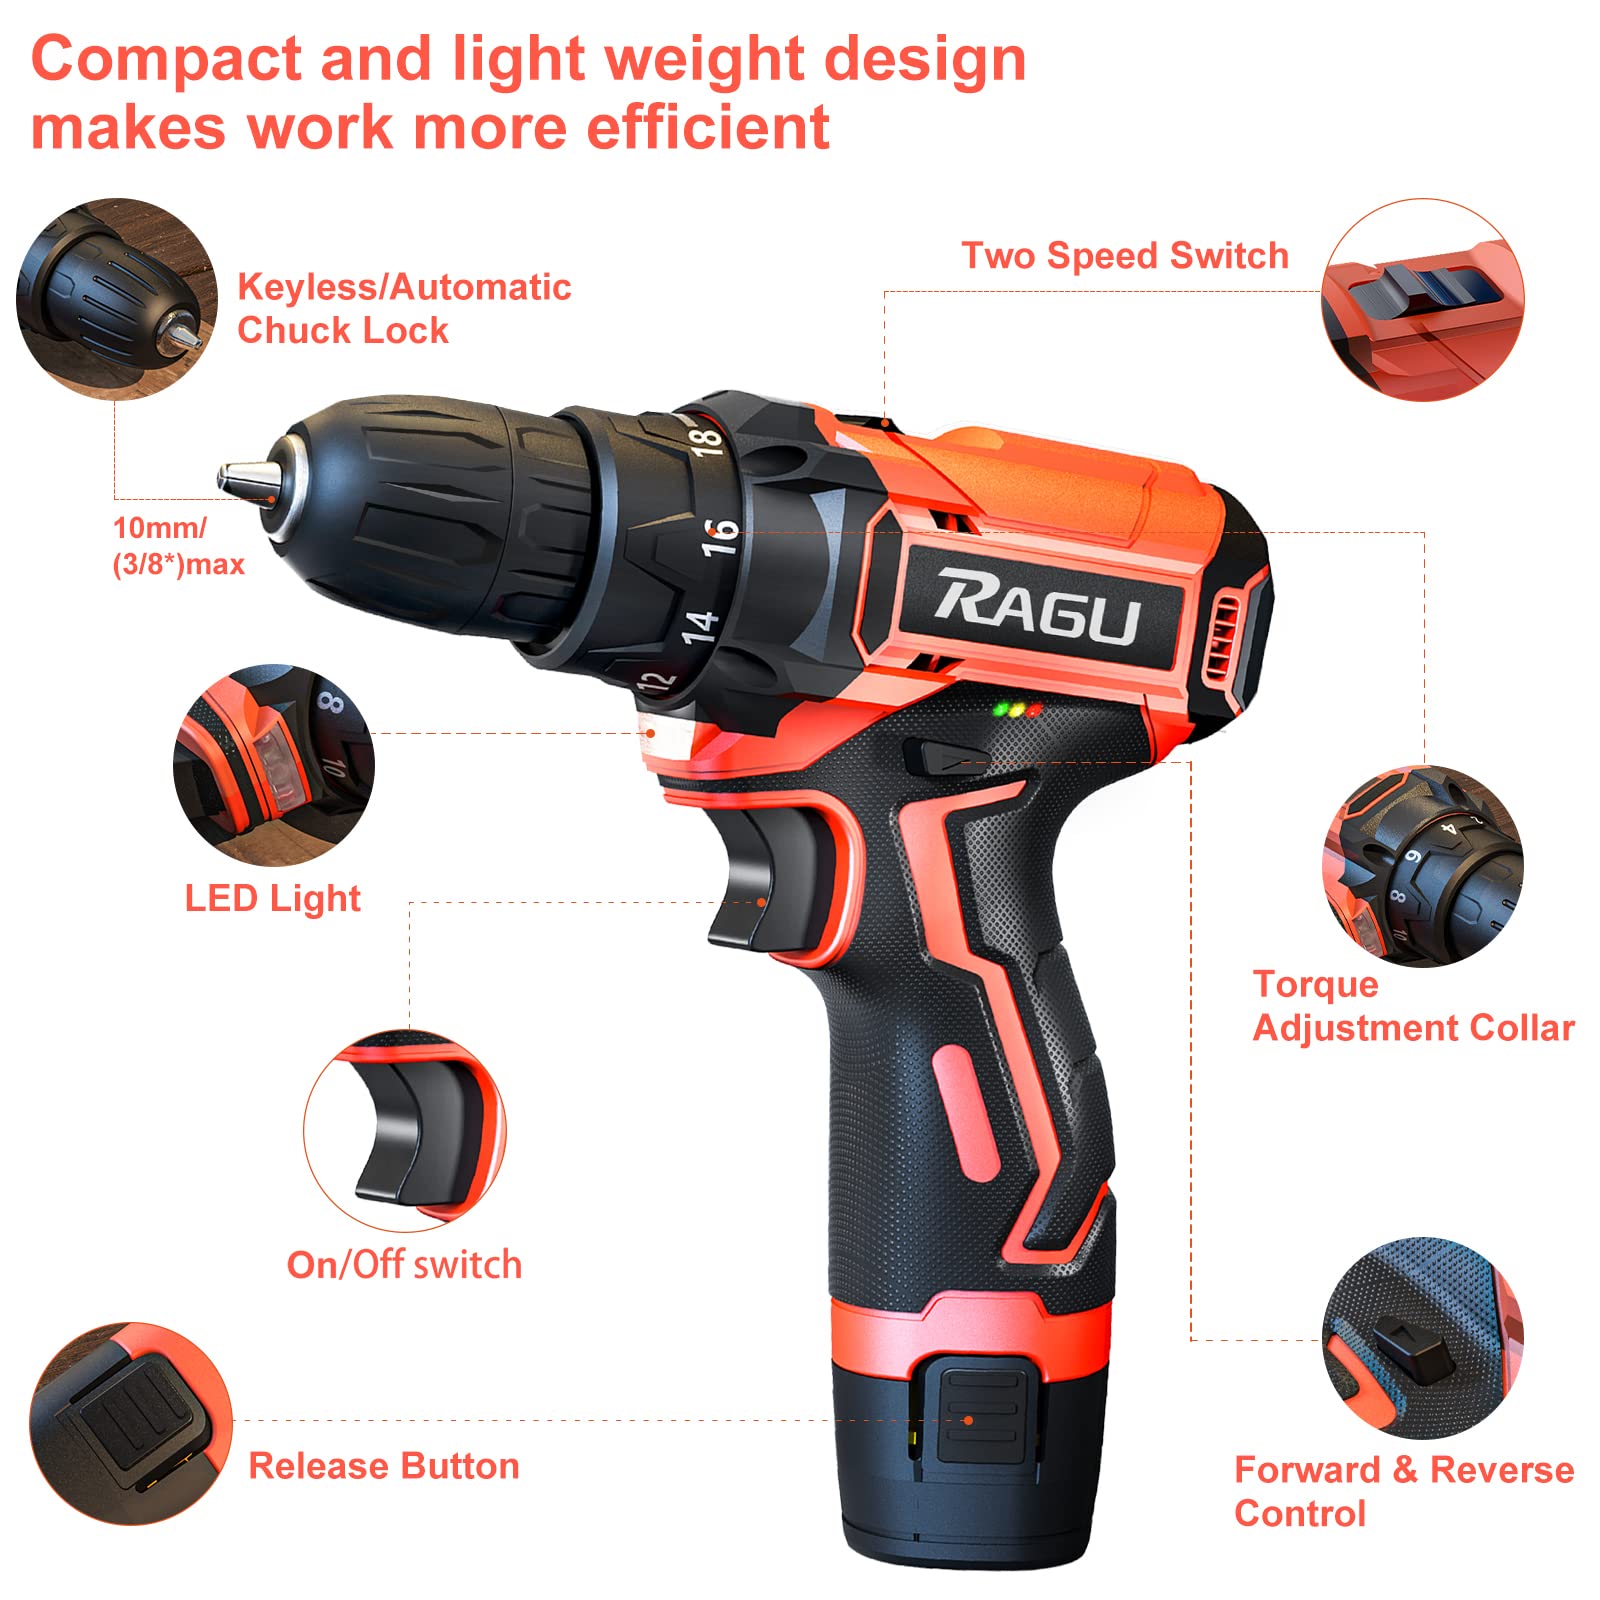 Cordless Drill 12v, 34pcs Drill Driver Set with 2 Batteries, Drill Set with 2 Variable Speed 3/8'' Keyless Chuck for Drilling Wood, Ceramics